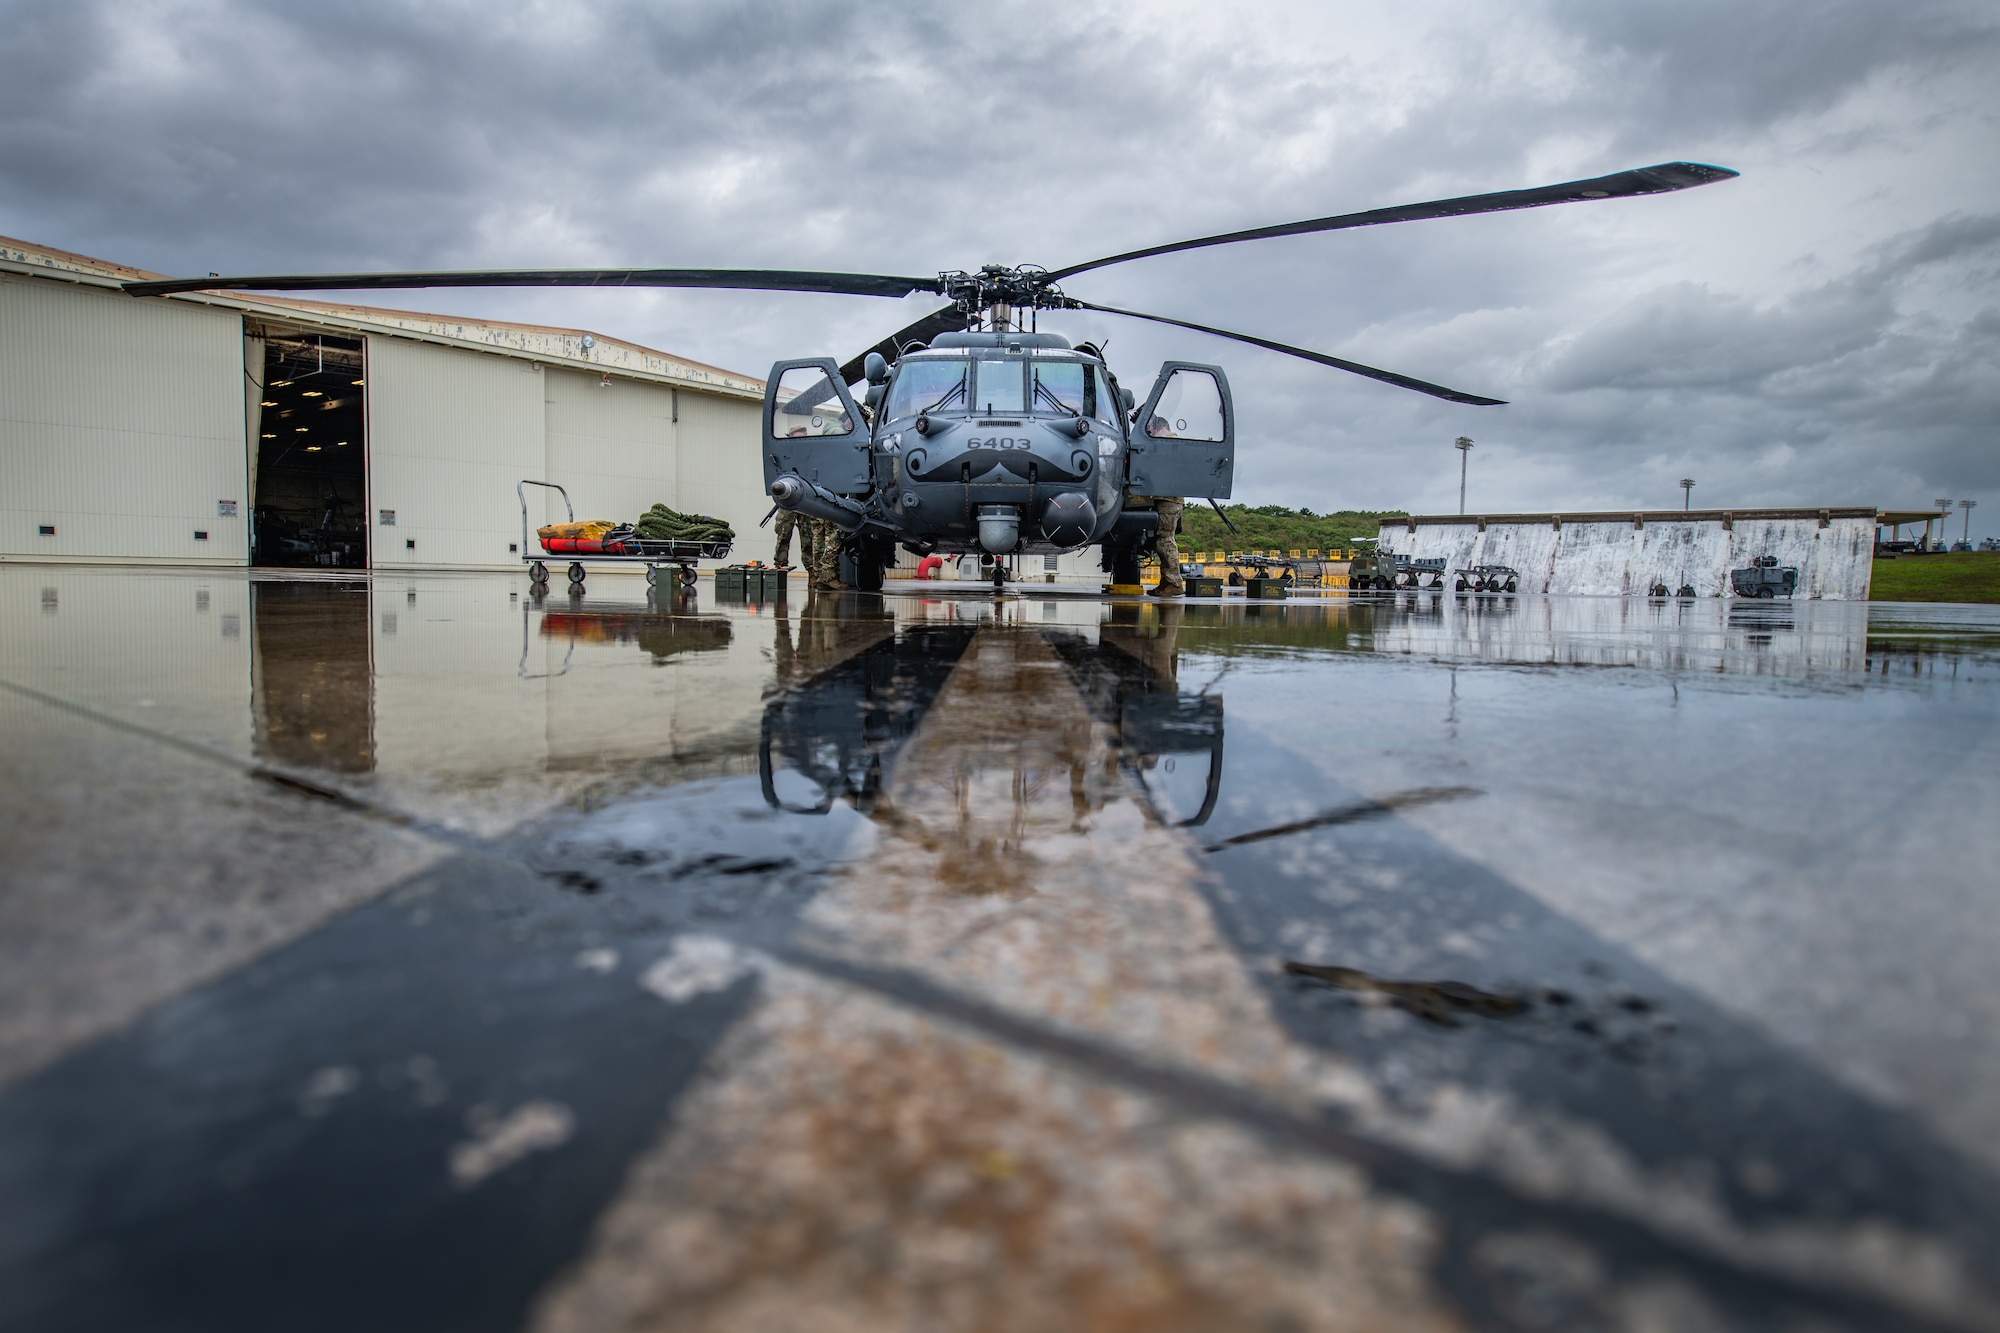 A helicopter sits outside a hangar on wet pavement